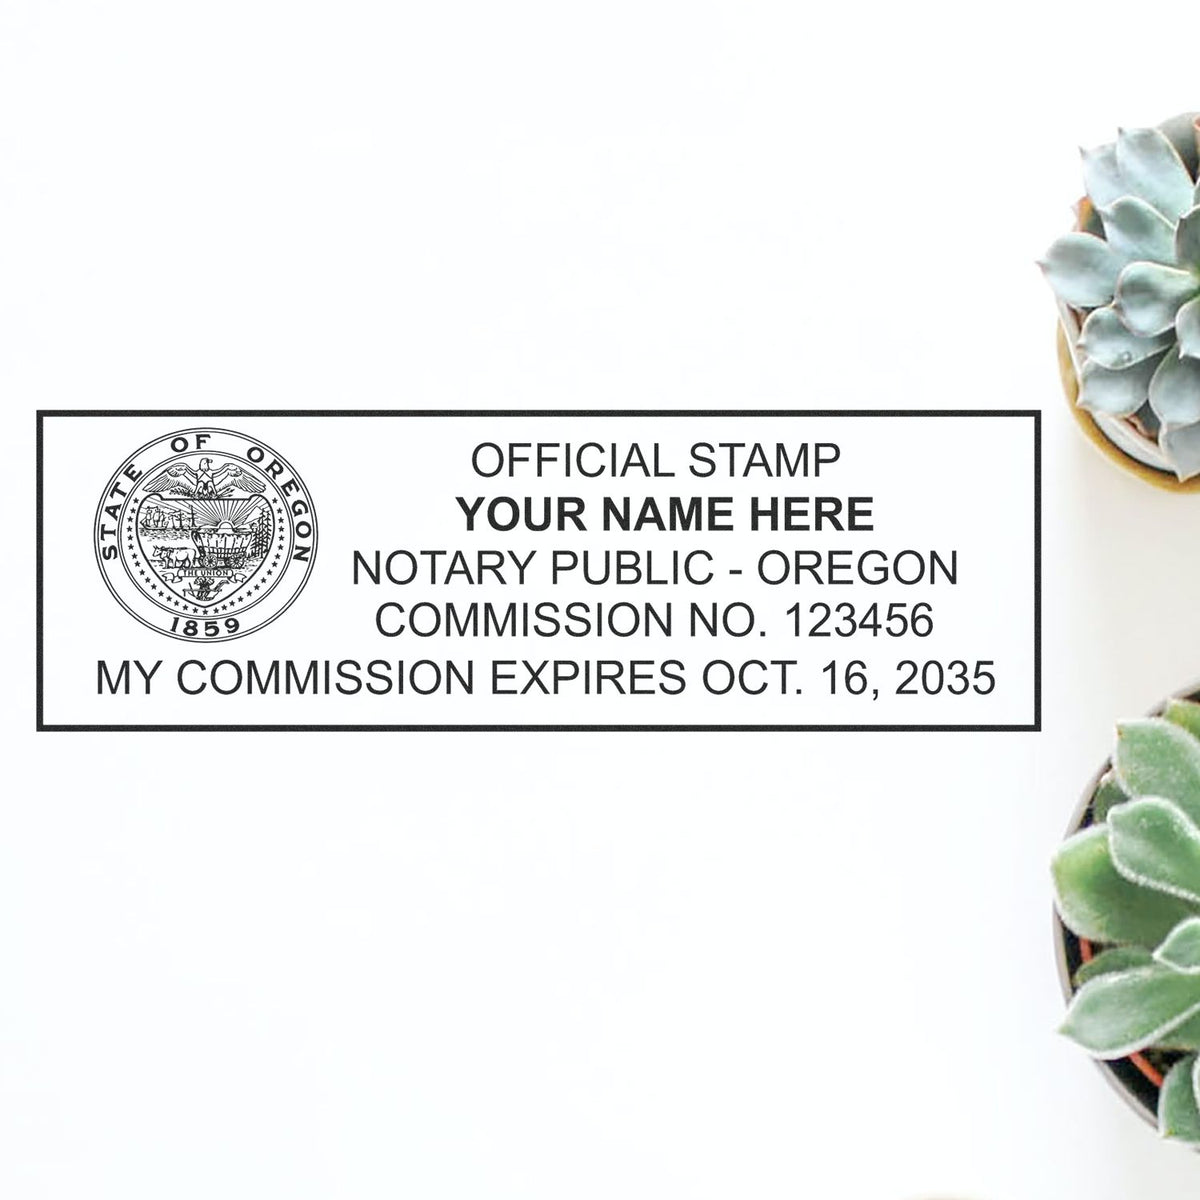 The Heavy-Duty Oregon Rectangular Notary Stamp stamp impression comes to life with a crisp, detailed photo on paper - showcasing true professional quality.